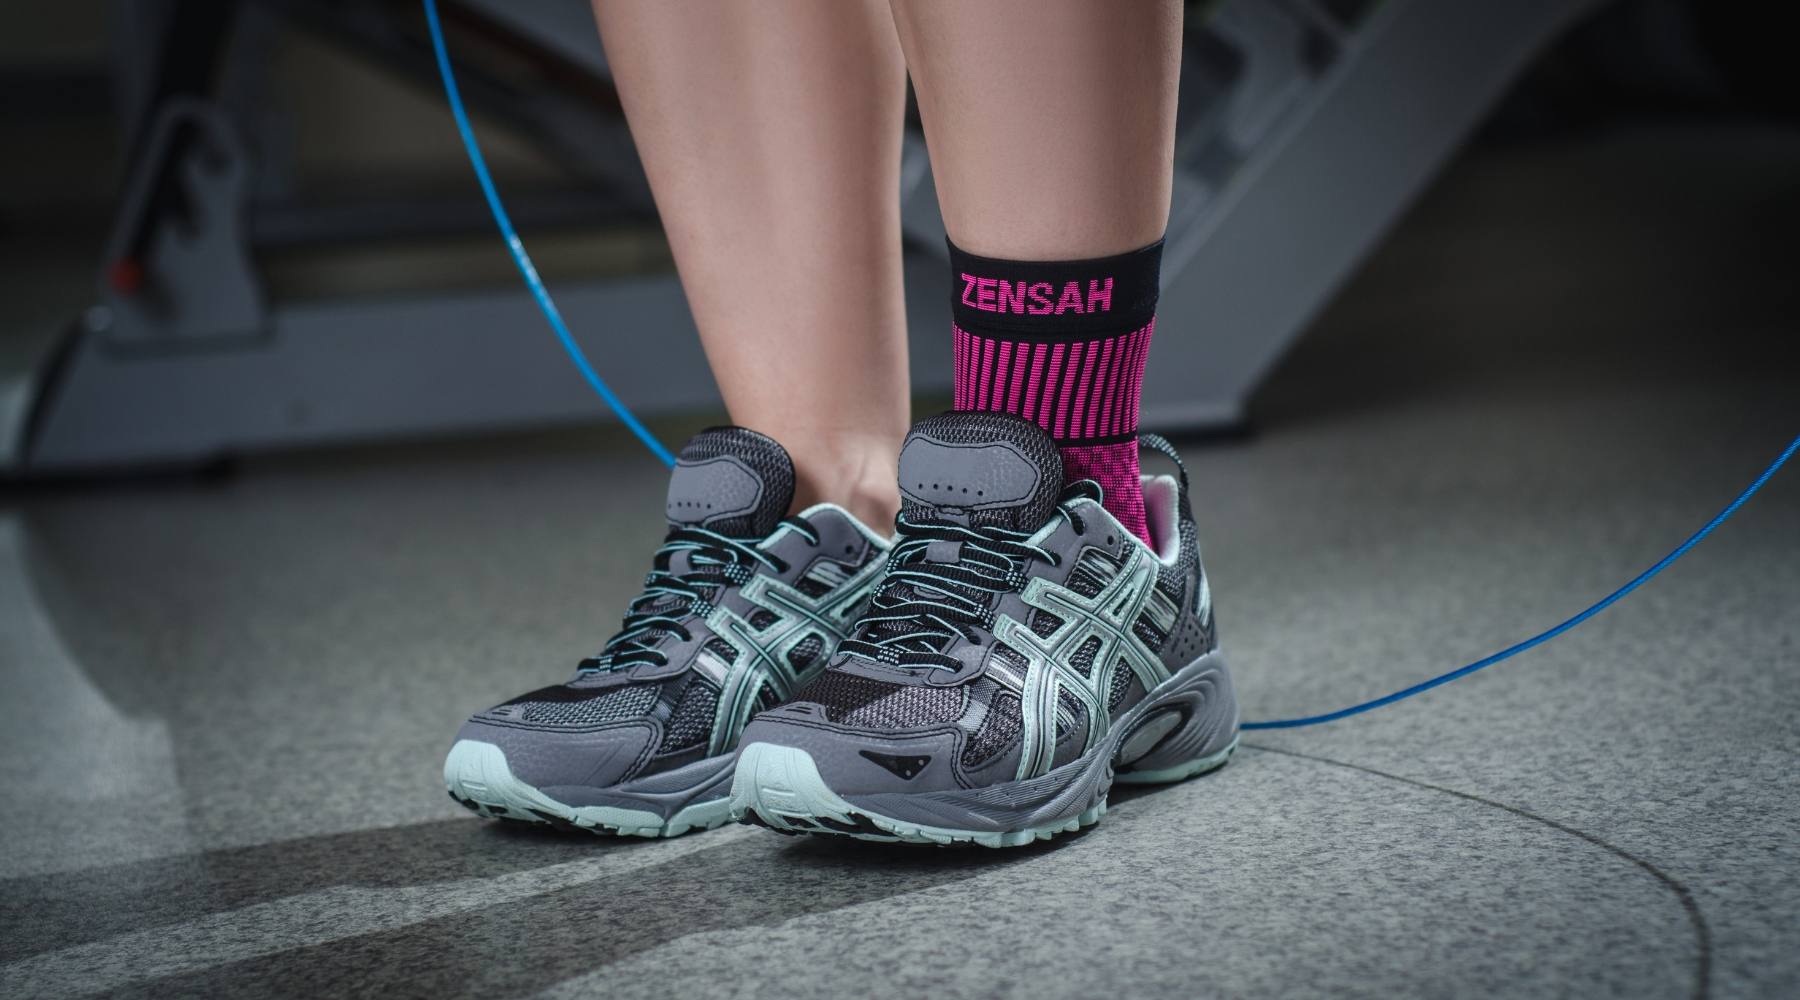 Which is the best ankle brace for you?